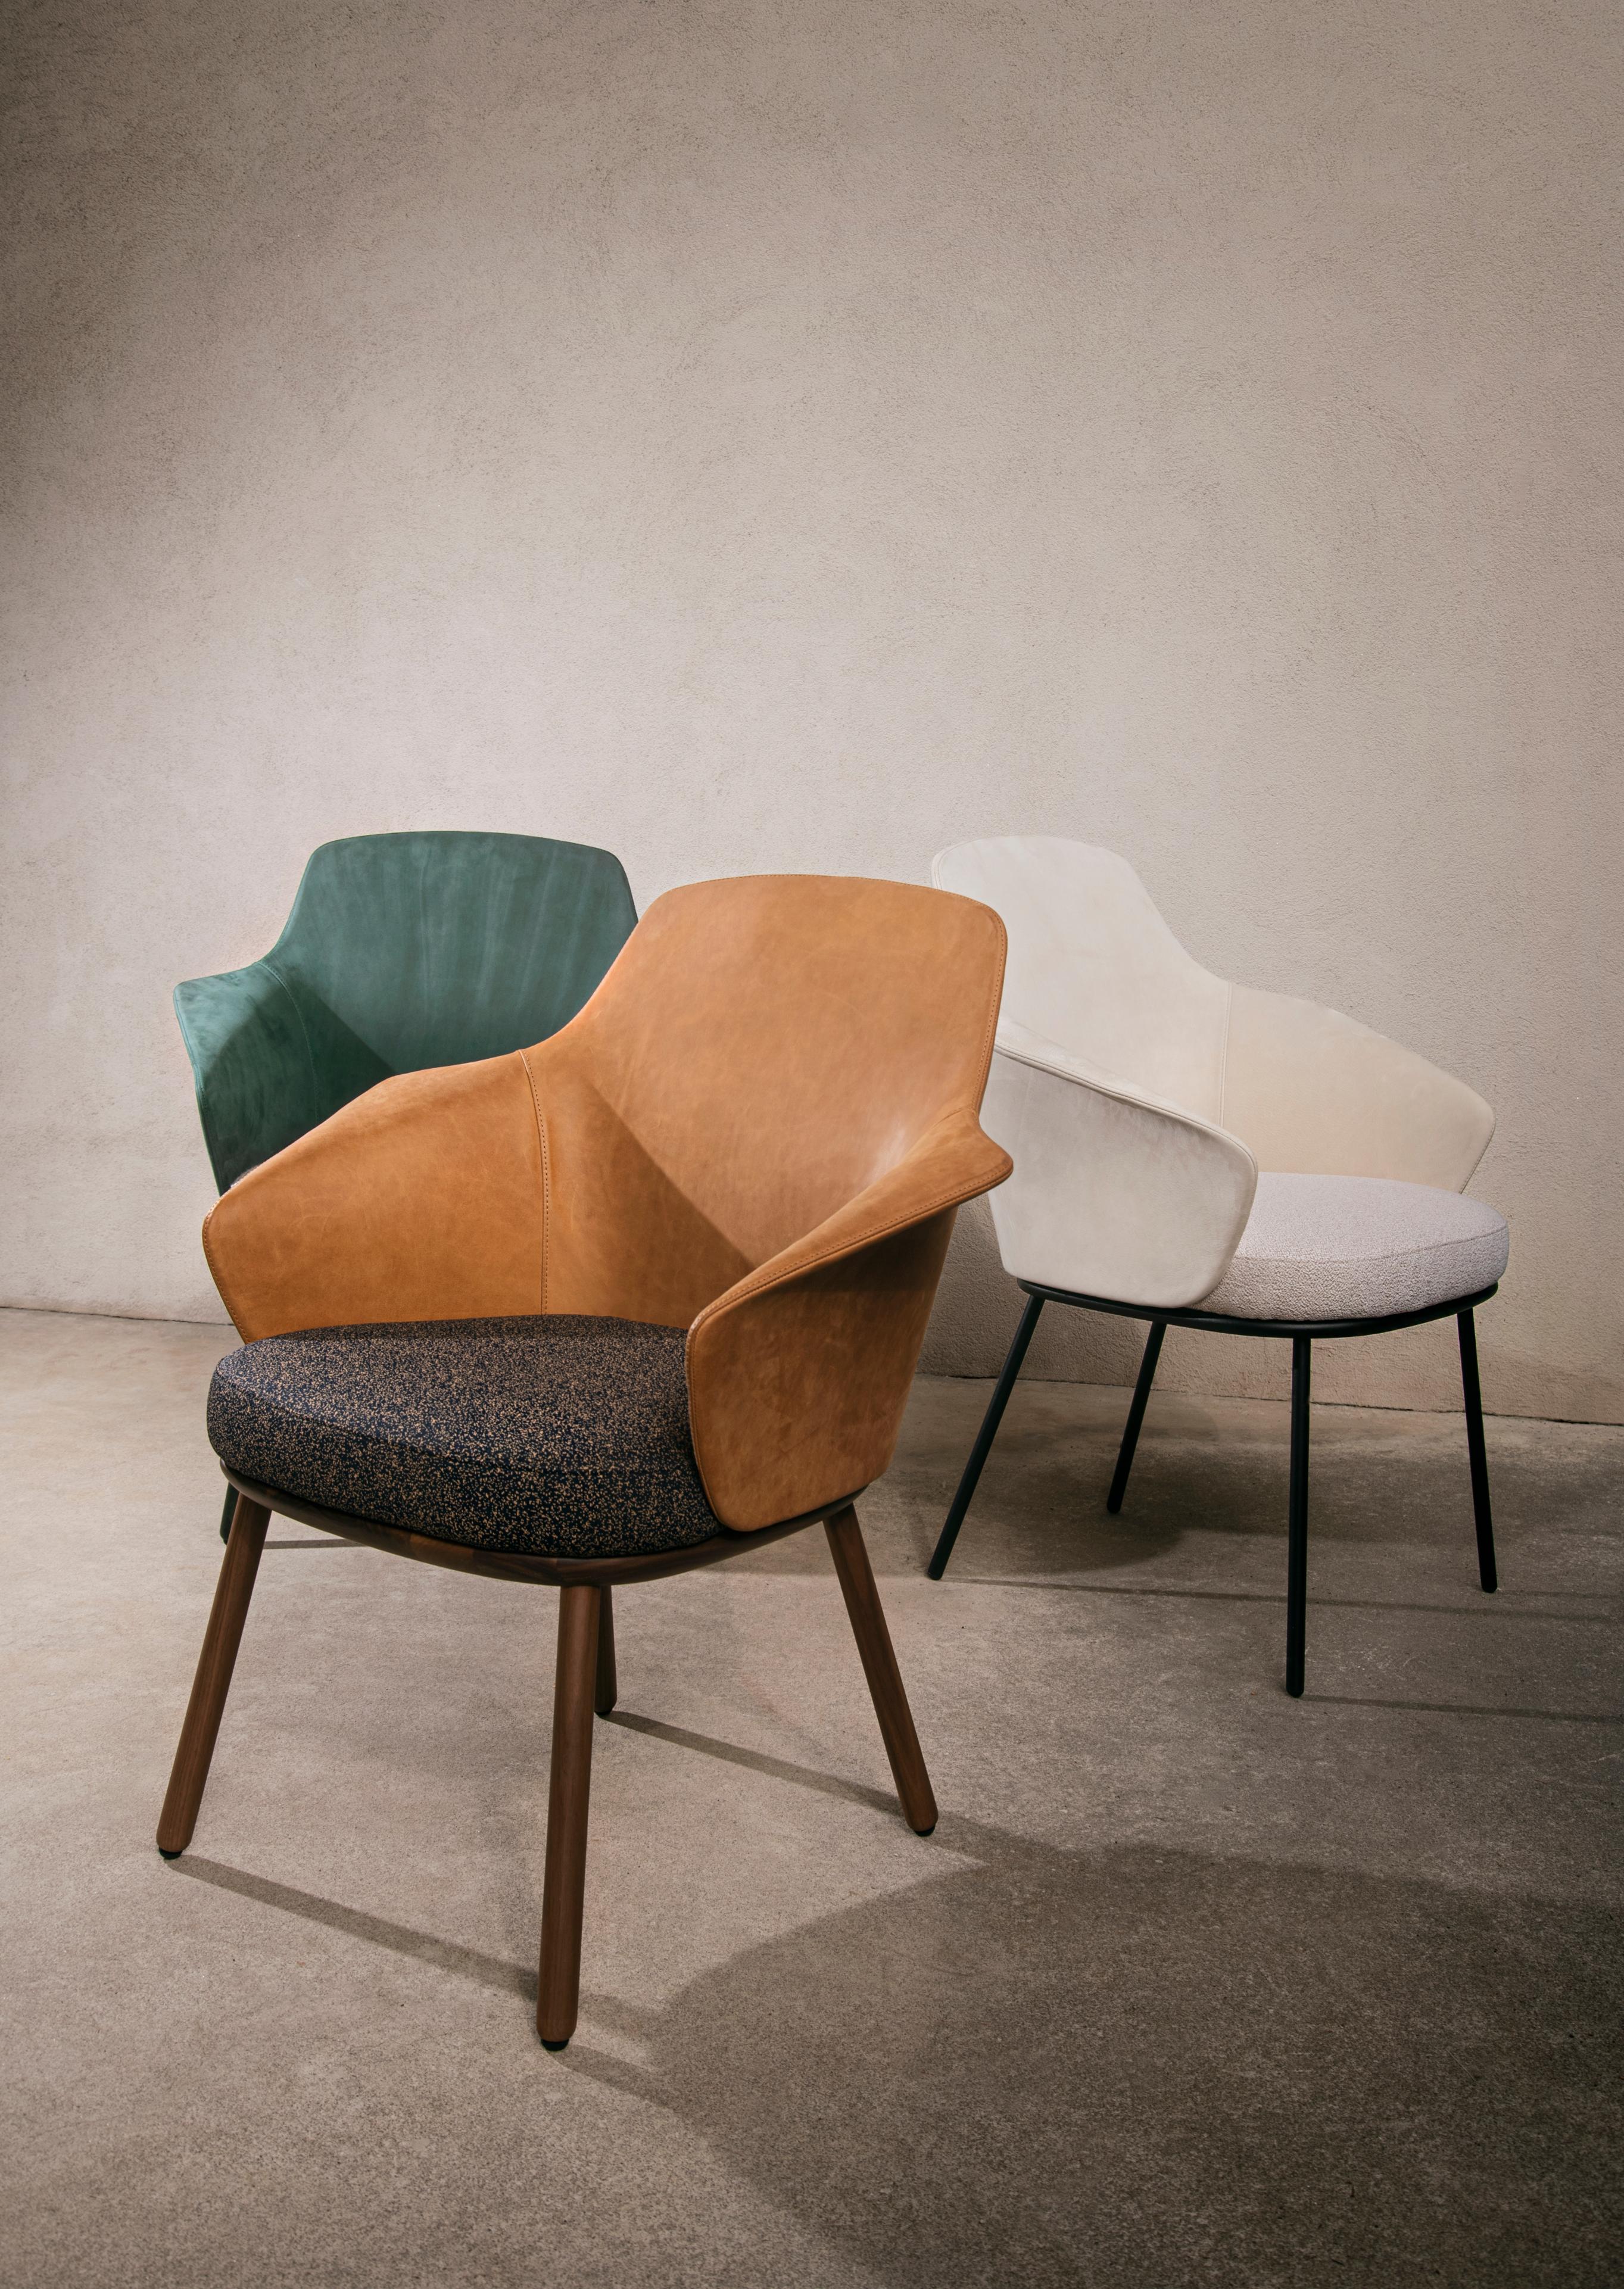 The Linus chair inspiration is rooted in the Nordic design heritage.
Homage to an organic modernism, its sumptuous and inviting shapes espouse a contemporary and straightforward minimalism. A modern chair that perfectly travels through past,